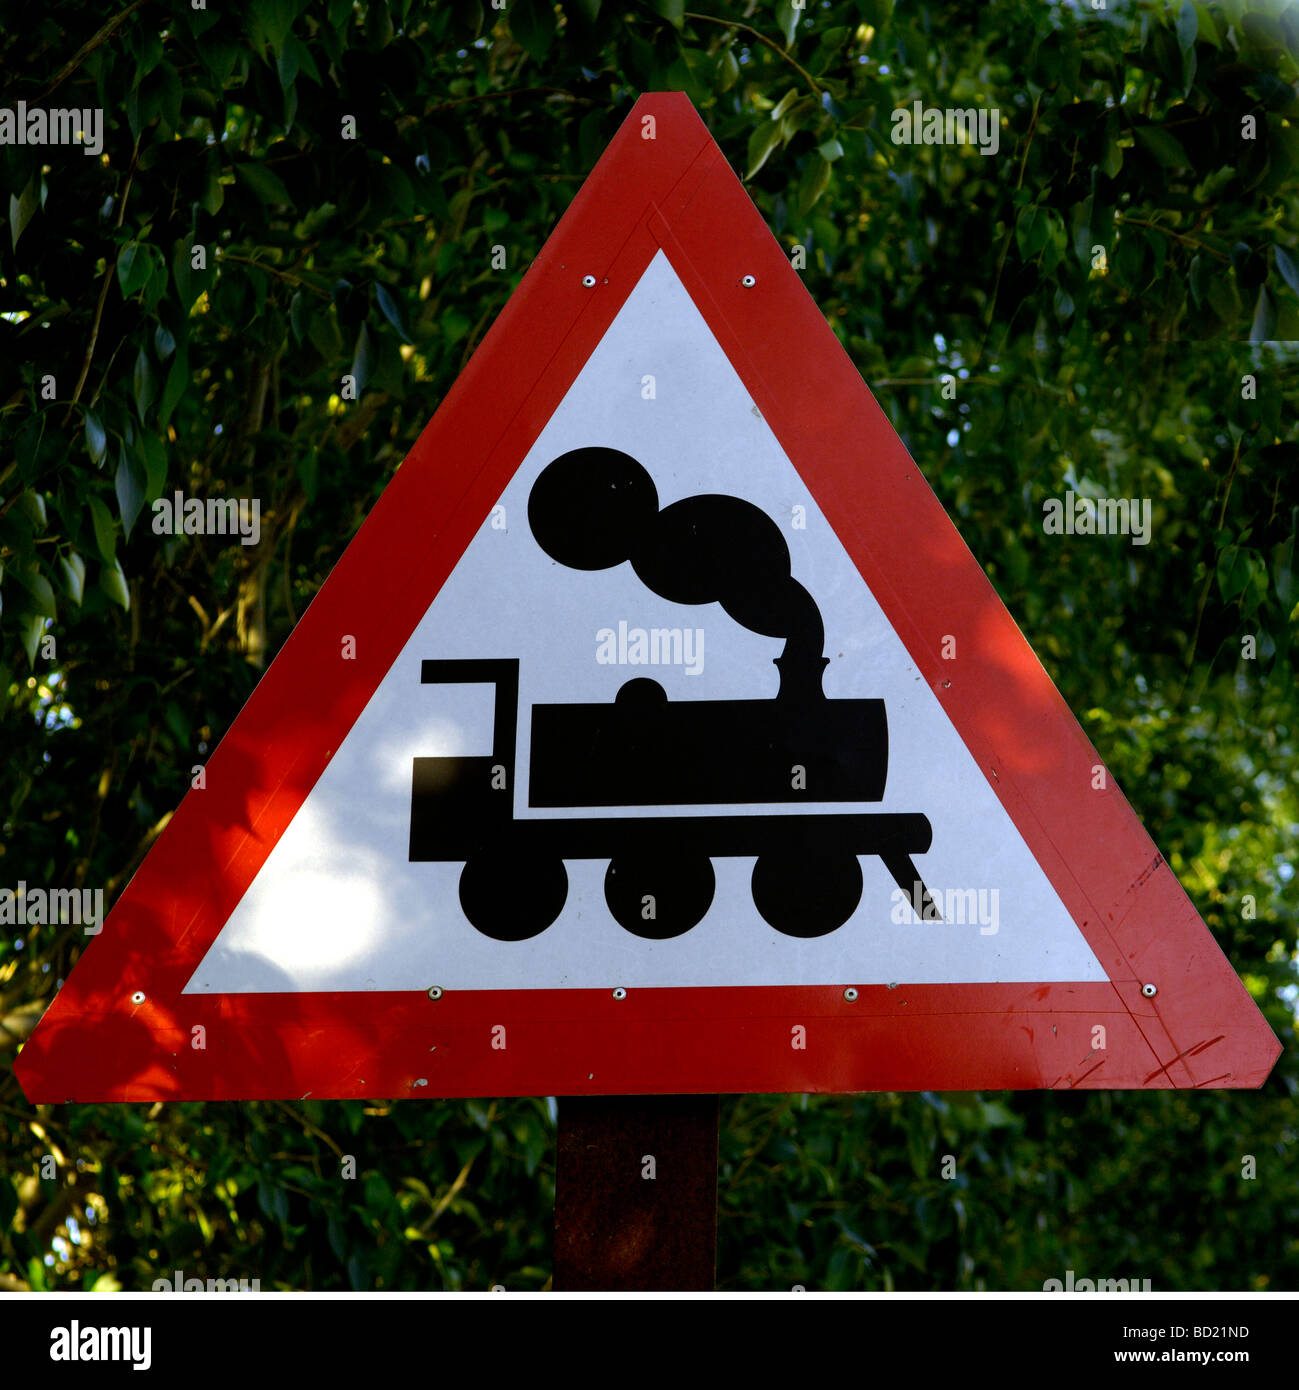 Road warning sign 'unguarded train crossing' South Africa, Africa. Stock Photo